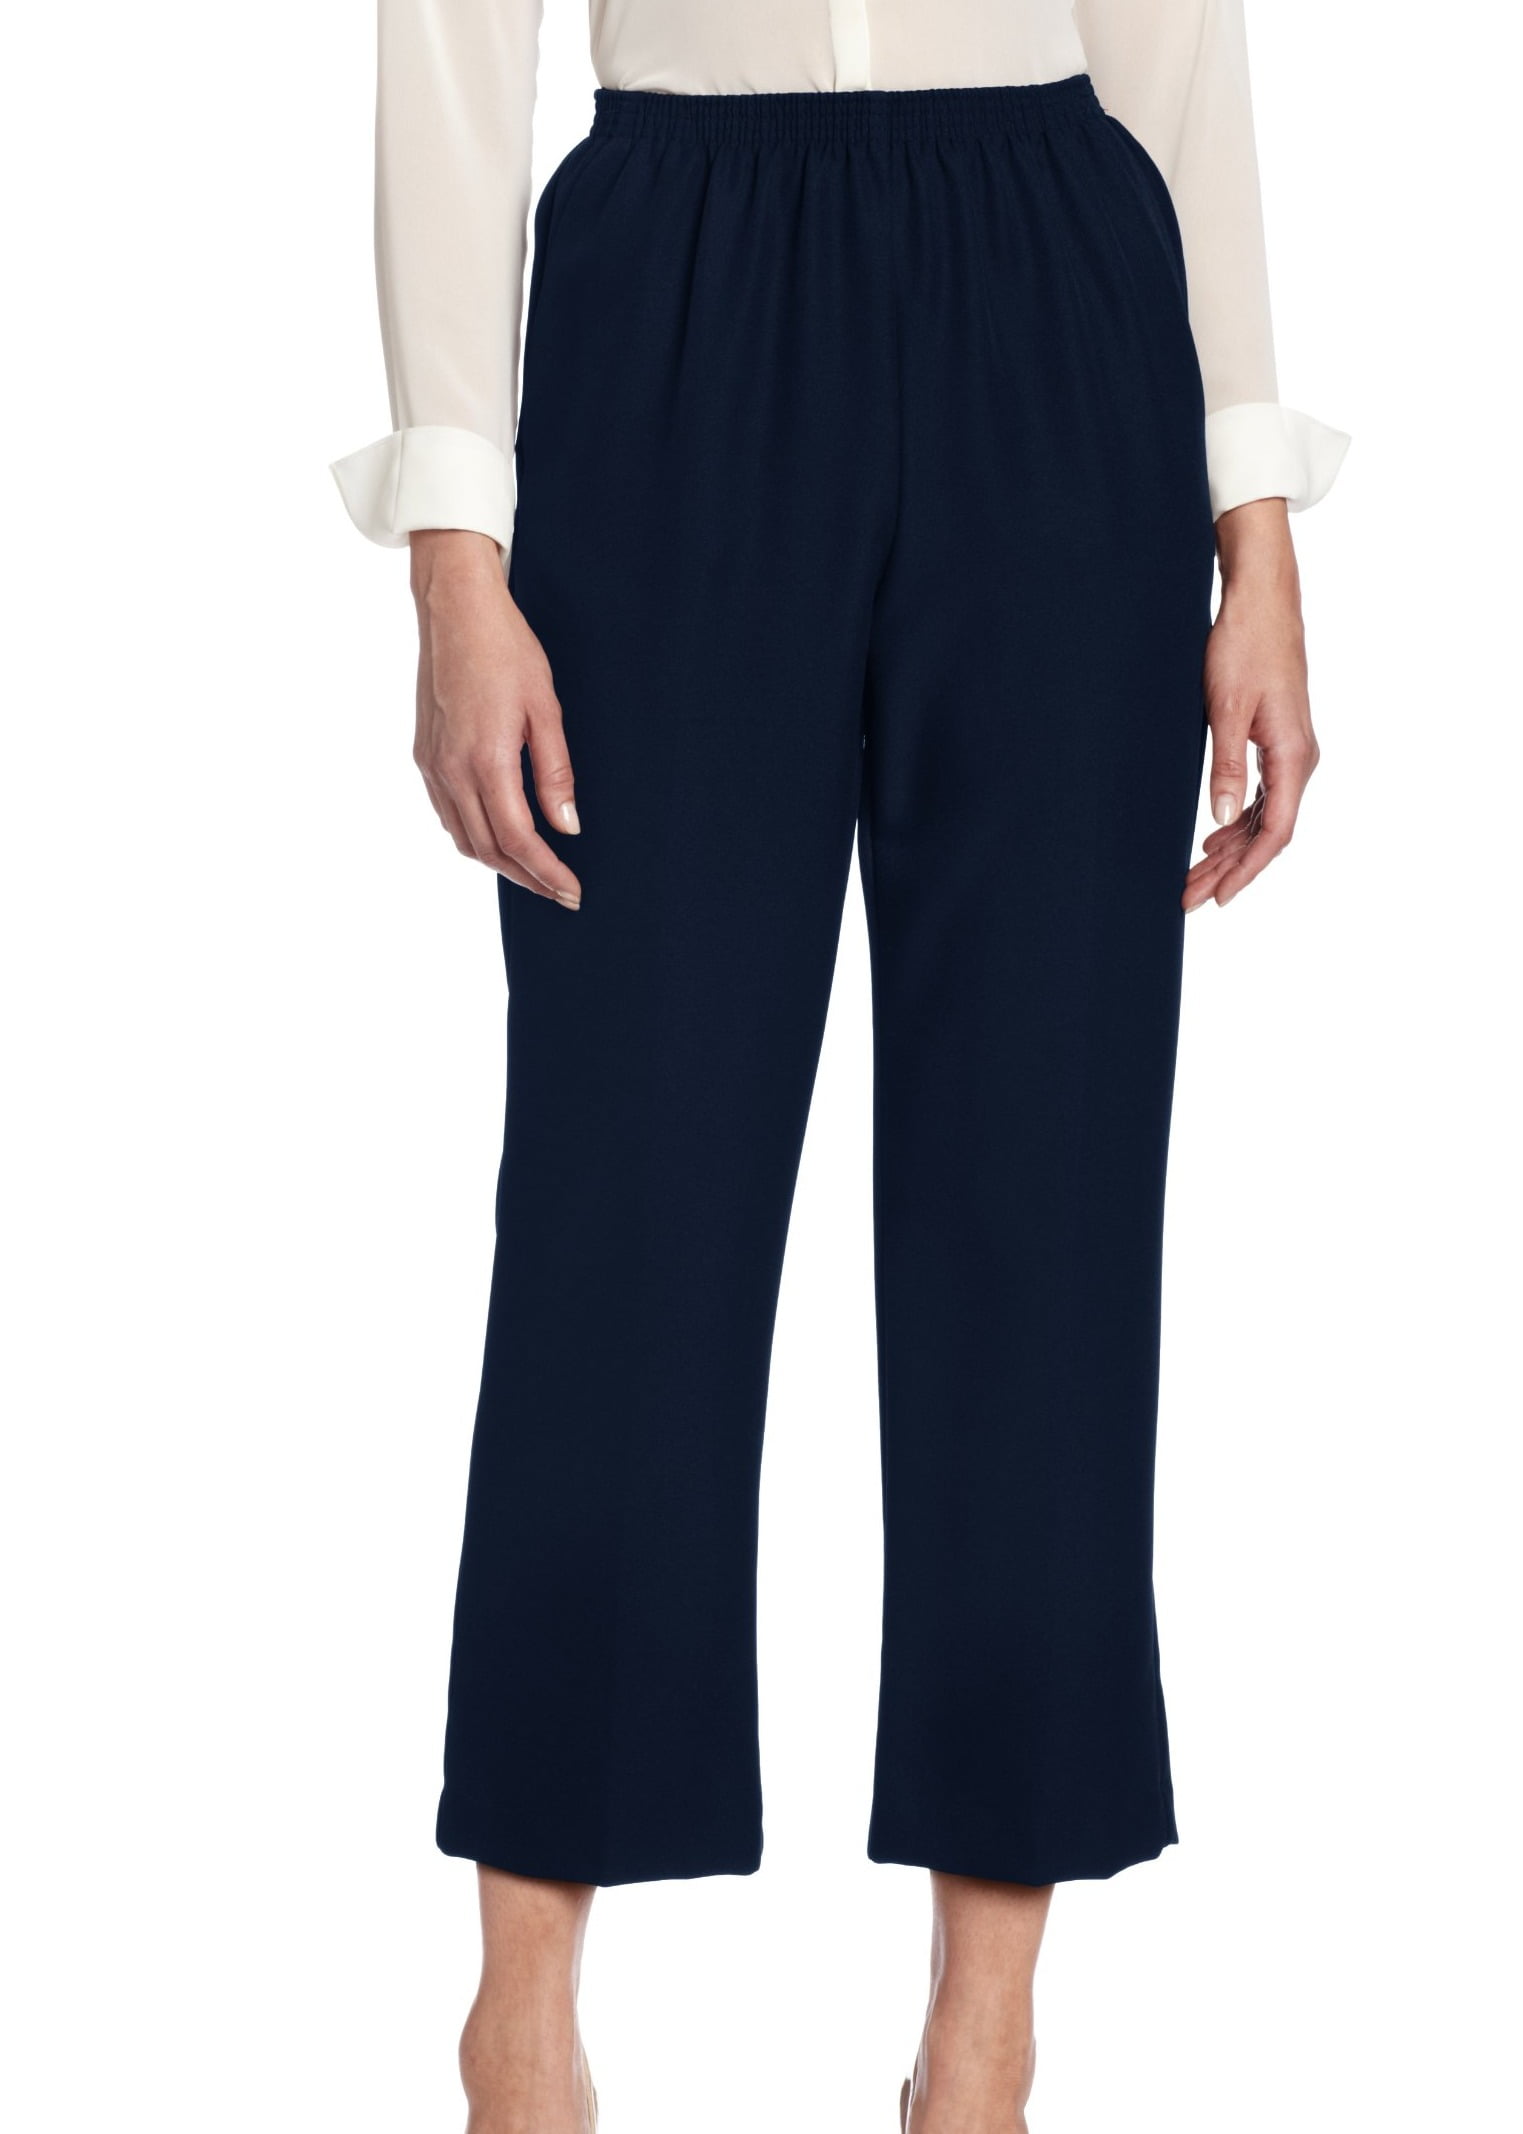 who sells alfred dunner pants